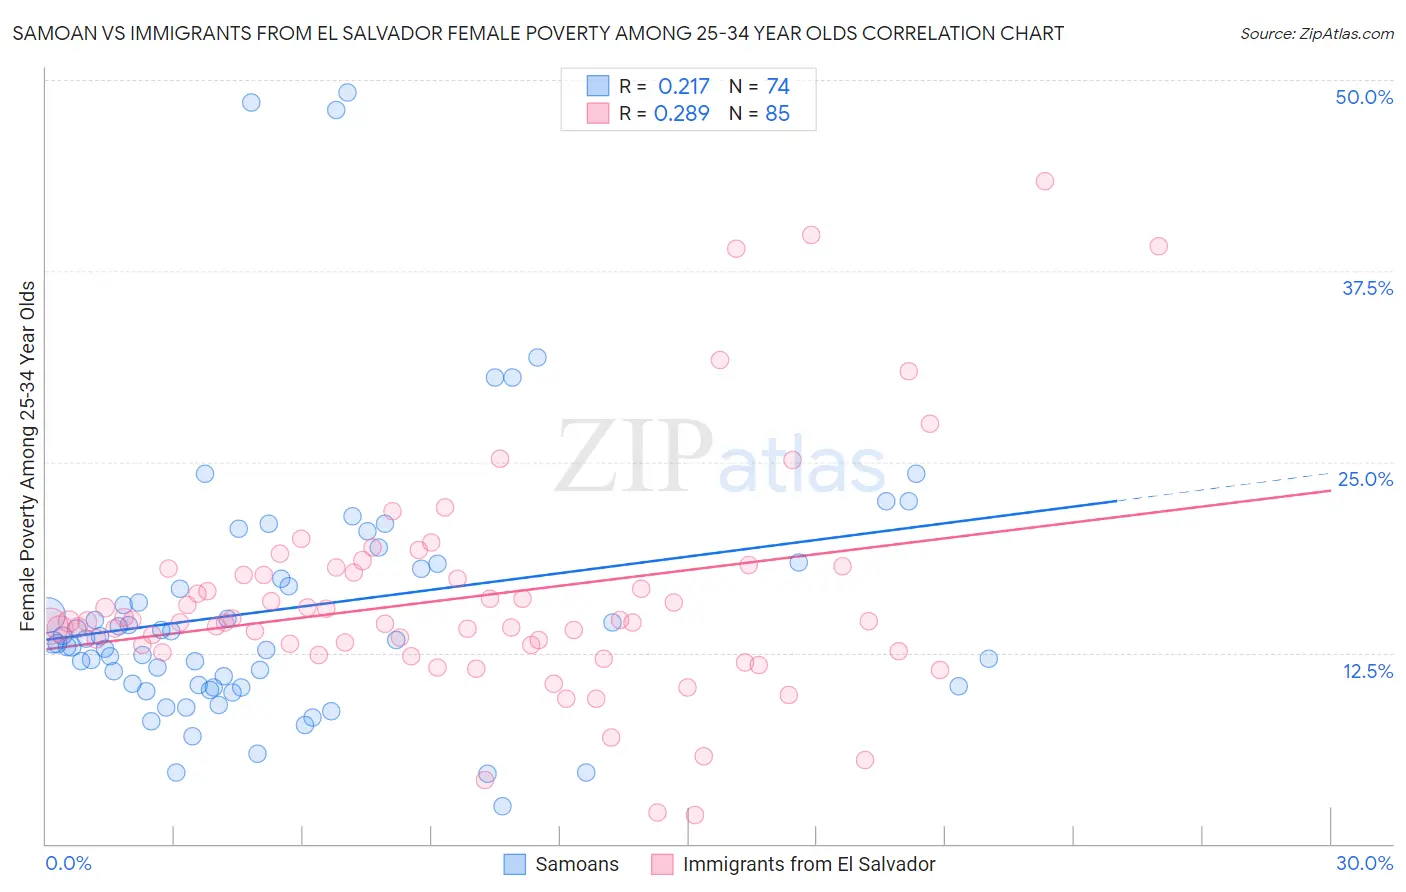 Samoan vs Immigrants from El Salvador Female Poverty Among 25-34 Year Olds